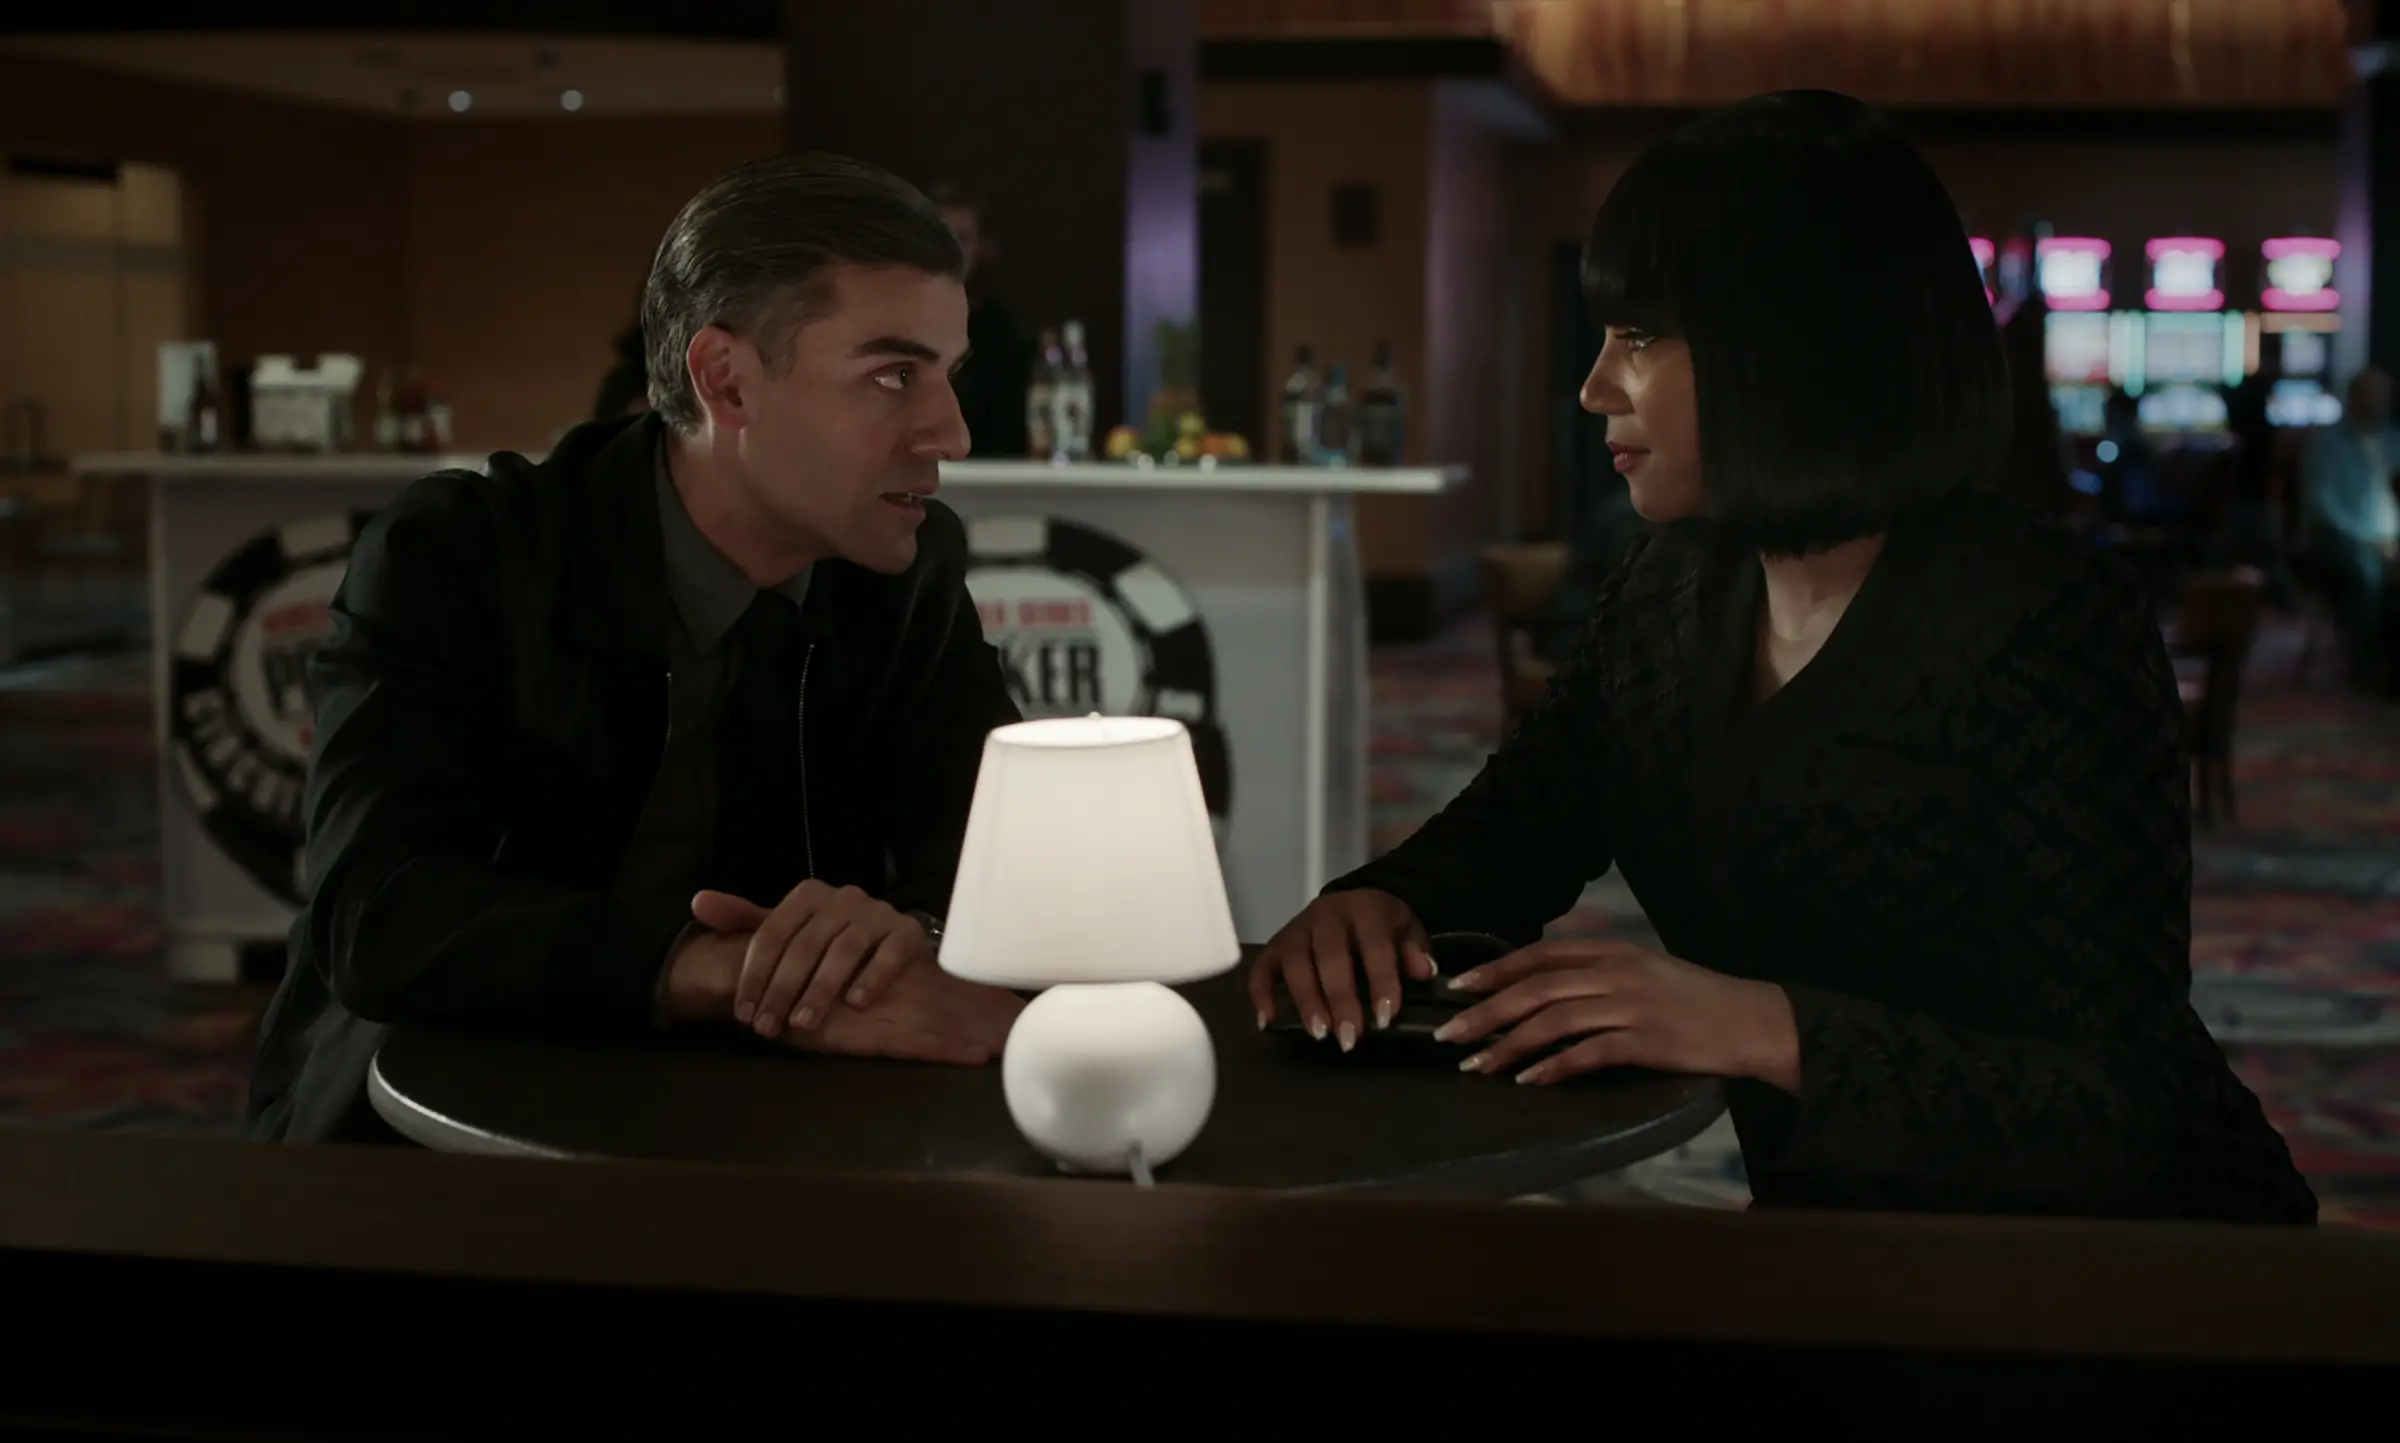 00781_FP_CARDCOUNTER Oscar Isaac stars as William Tell and Tiffany Haddish as La Linda in THE CARD COUNTER, a Focus Features release.   Credit: Courtesy of Focus Features